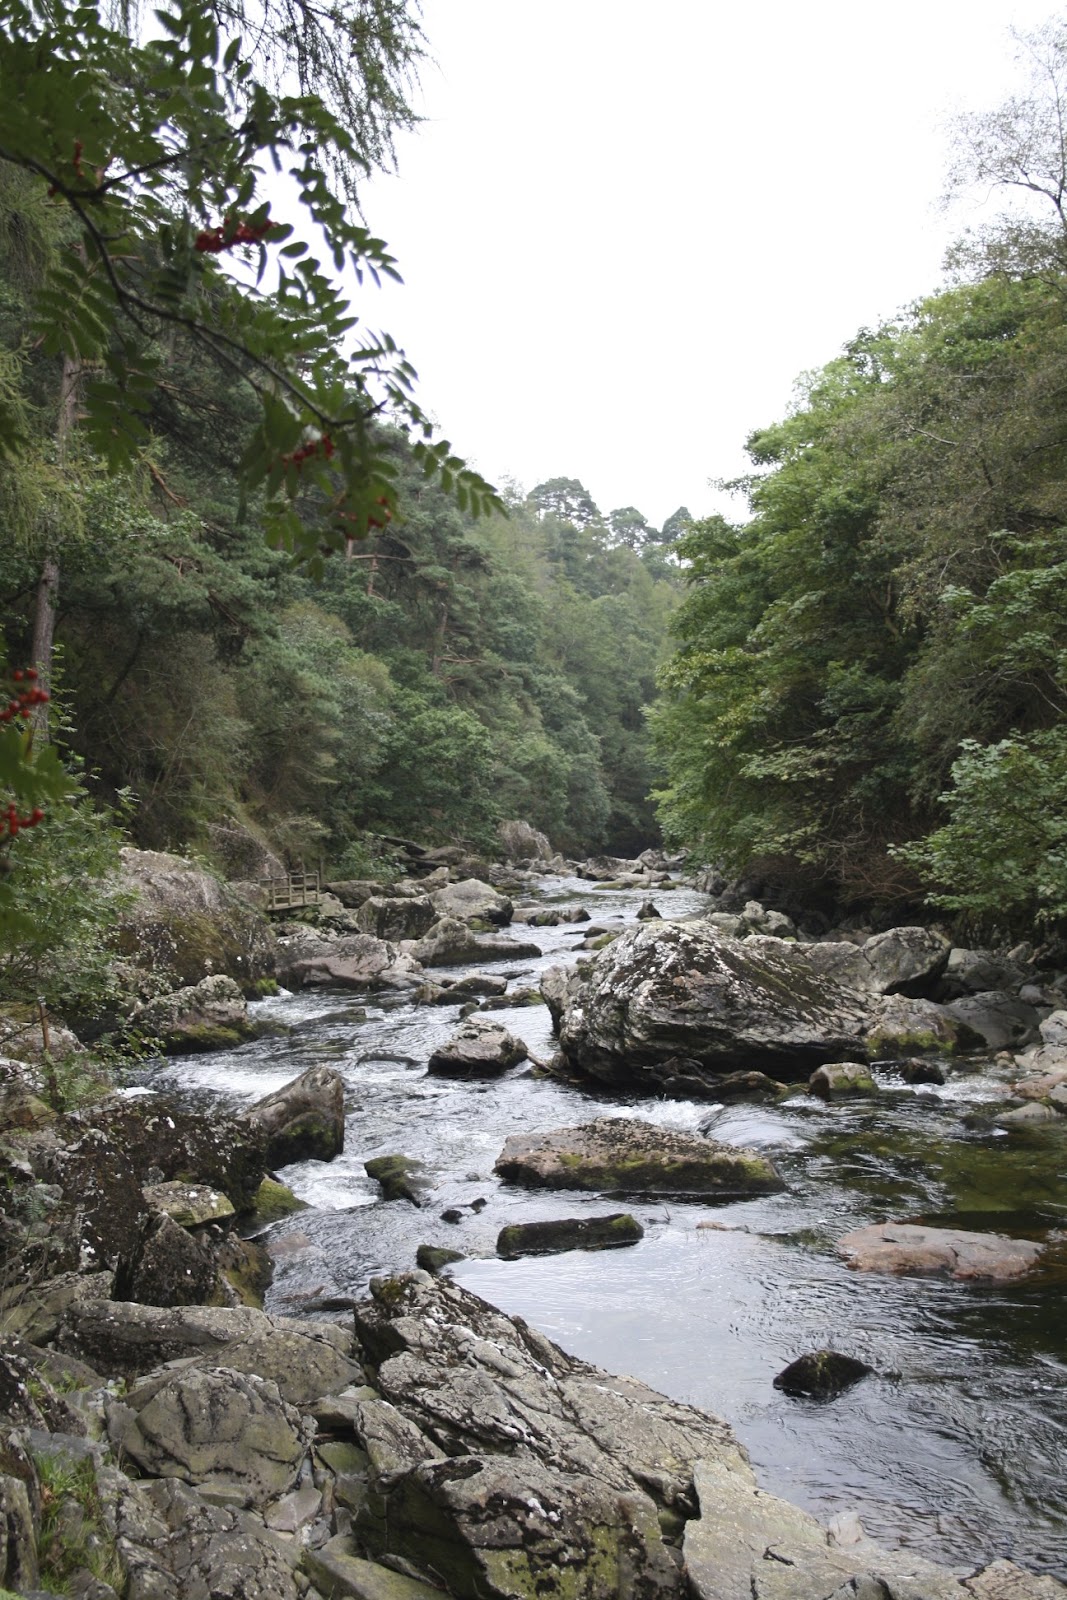 Below are a couple of photos taken of the Aberglaslyn Pass, the rest ...